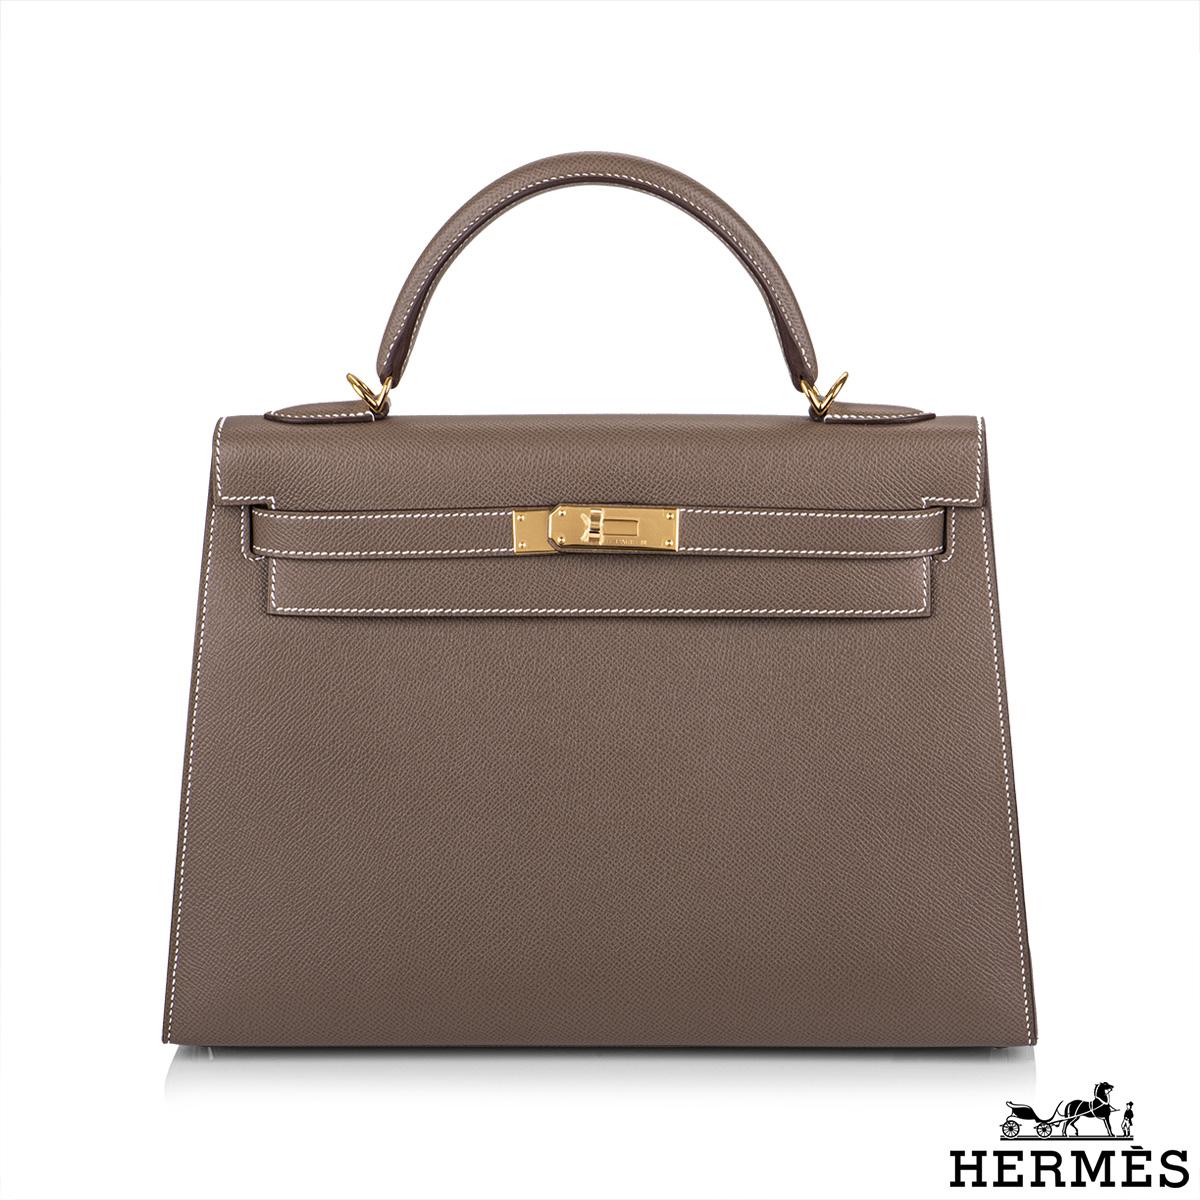 An exquisite Hermès Kelly II Sellier 32cm Epsom Etoupe handbag. The exterior of this Kelly features a sellier style in etoupe epsom leather. The etoupe epsom leather is complimented with gold hardware and contrast white stitchings. It features a